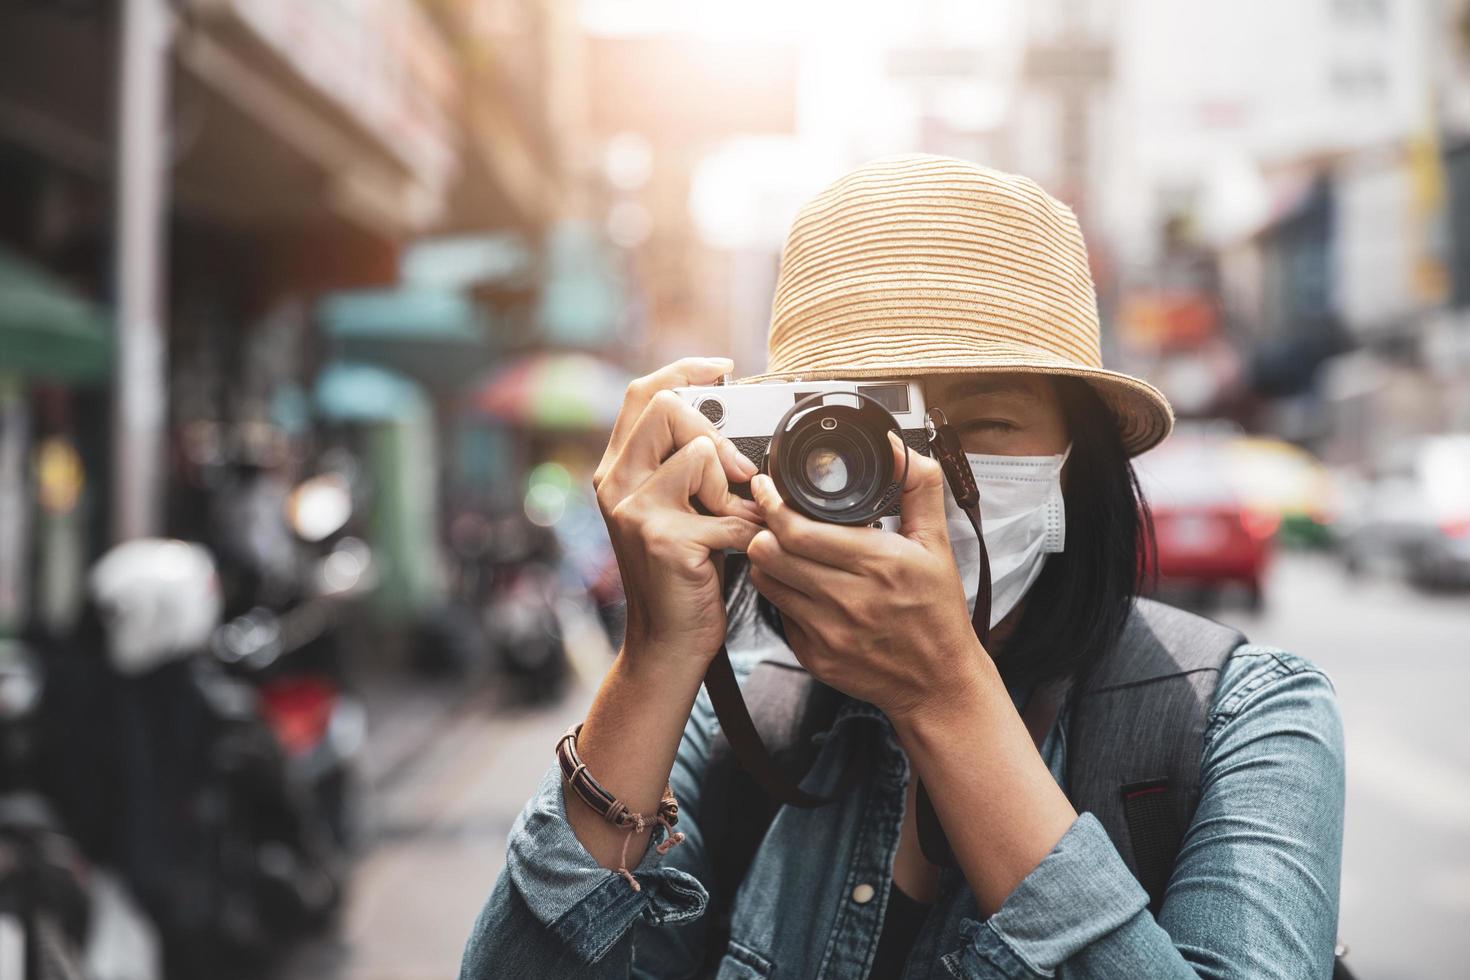 Asian women wearing surgical face mask traveler with camera travel of lifestyle portrait , outdoor summer concept photo